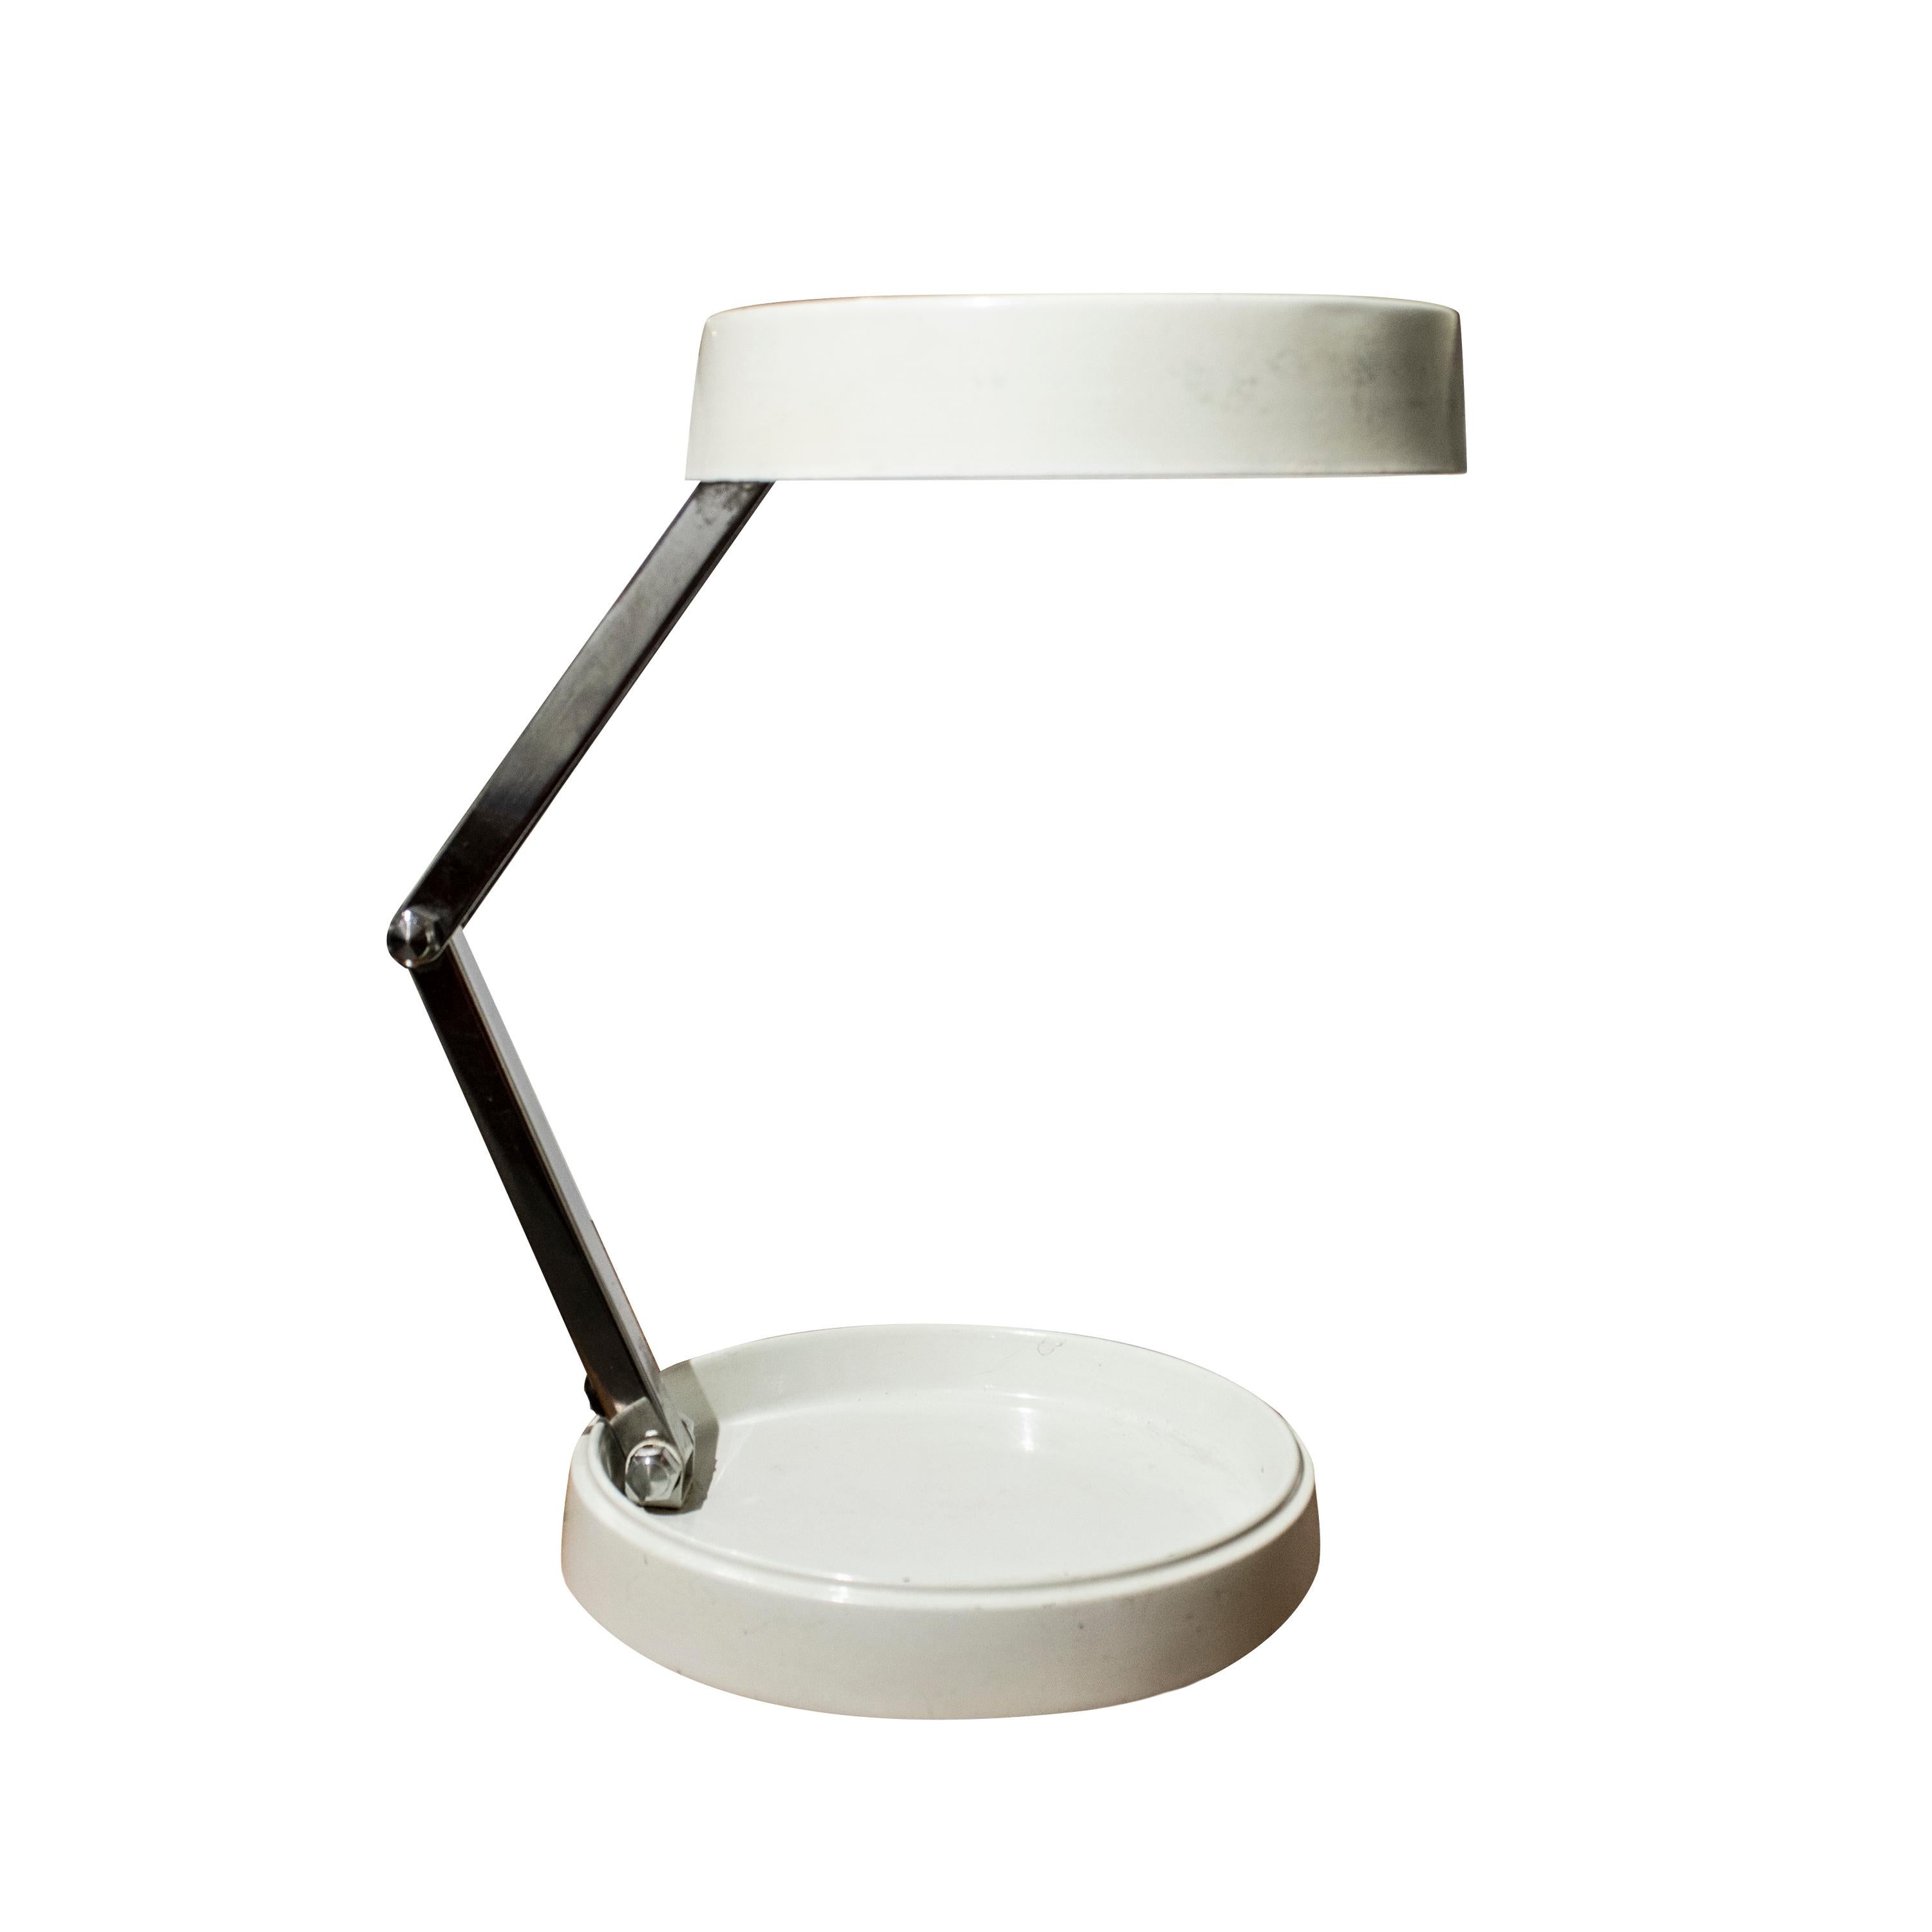 Mid-century modern off-white folding table lamp Designed by Enrique Aparicio and edited by G.E.I., Gabinete de Estudios Industriales. It consists of a round flat metal base and lamp shade with a metal tube structure that can be folded.
Upon folding